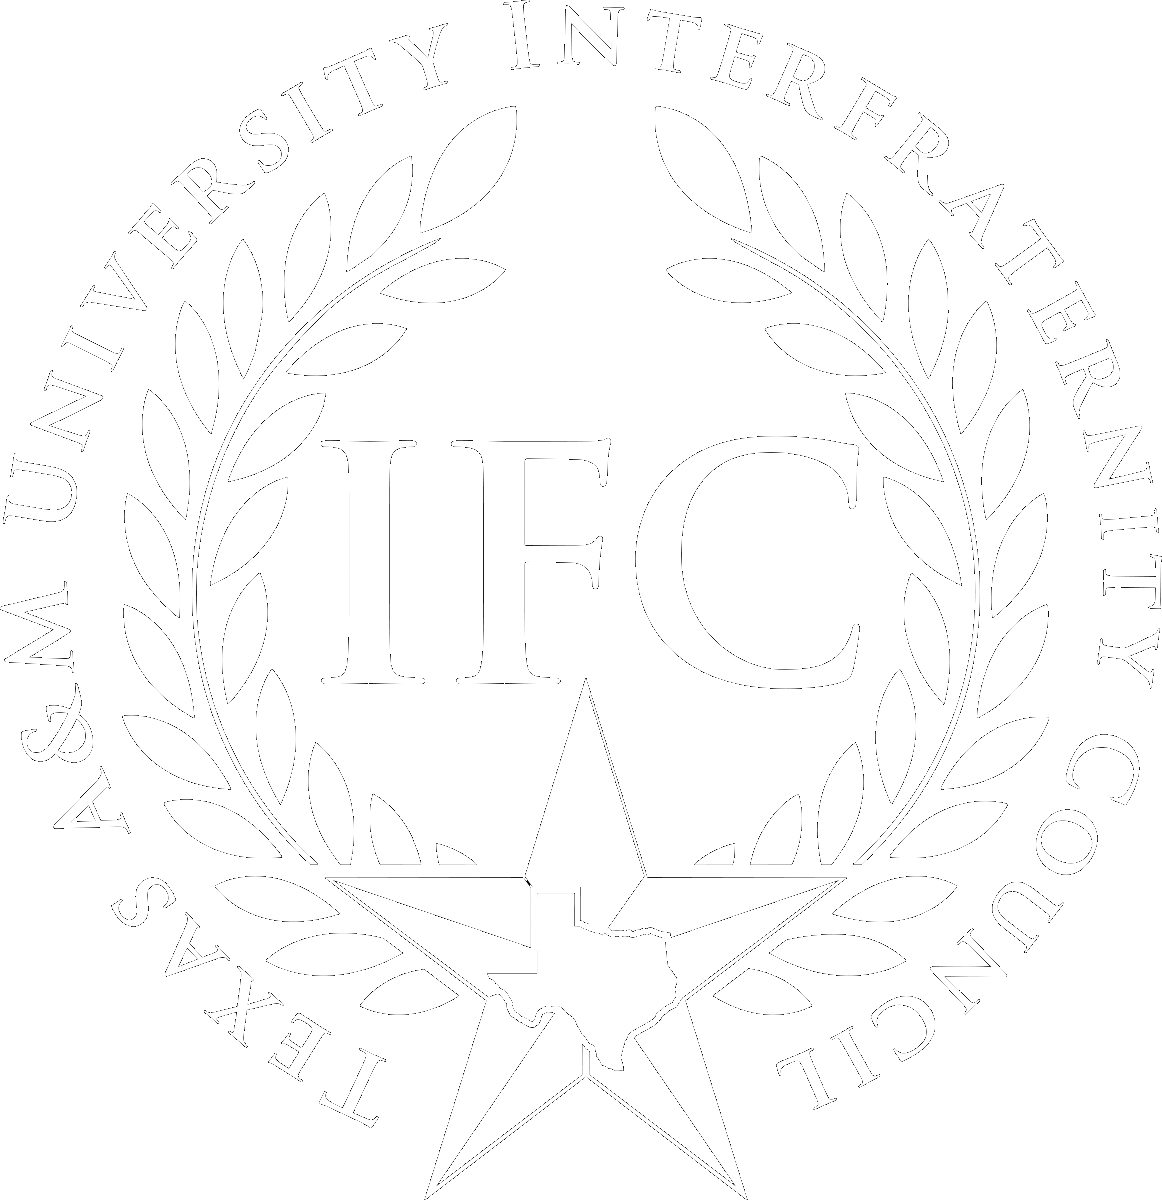 Texas A&M Interfraternity Council